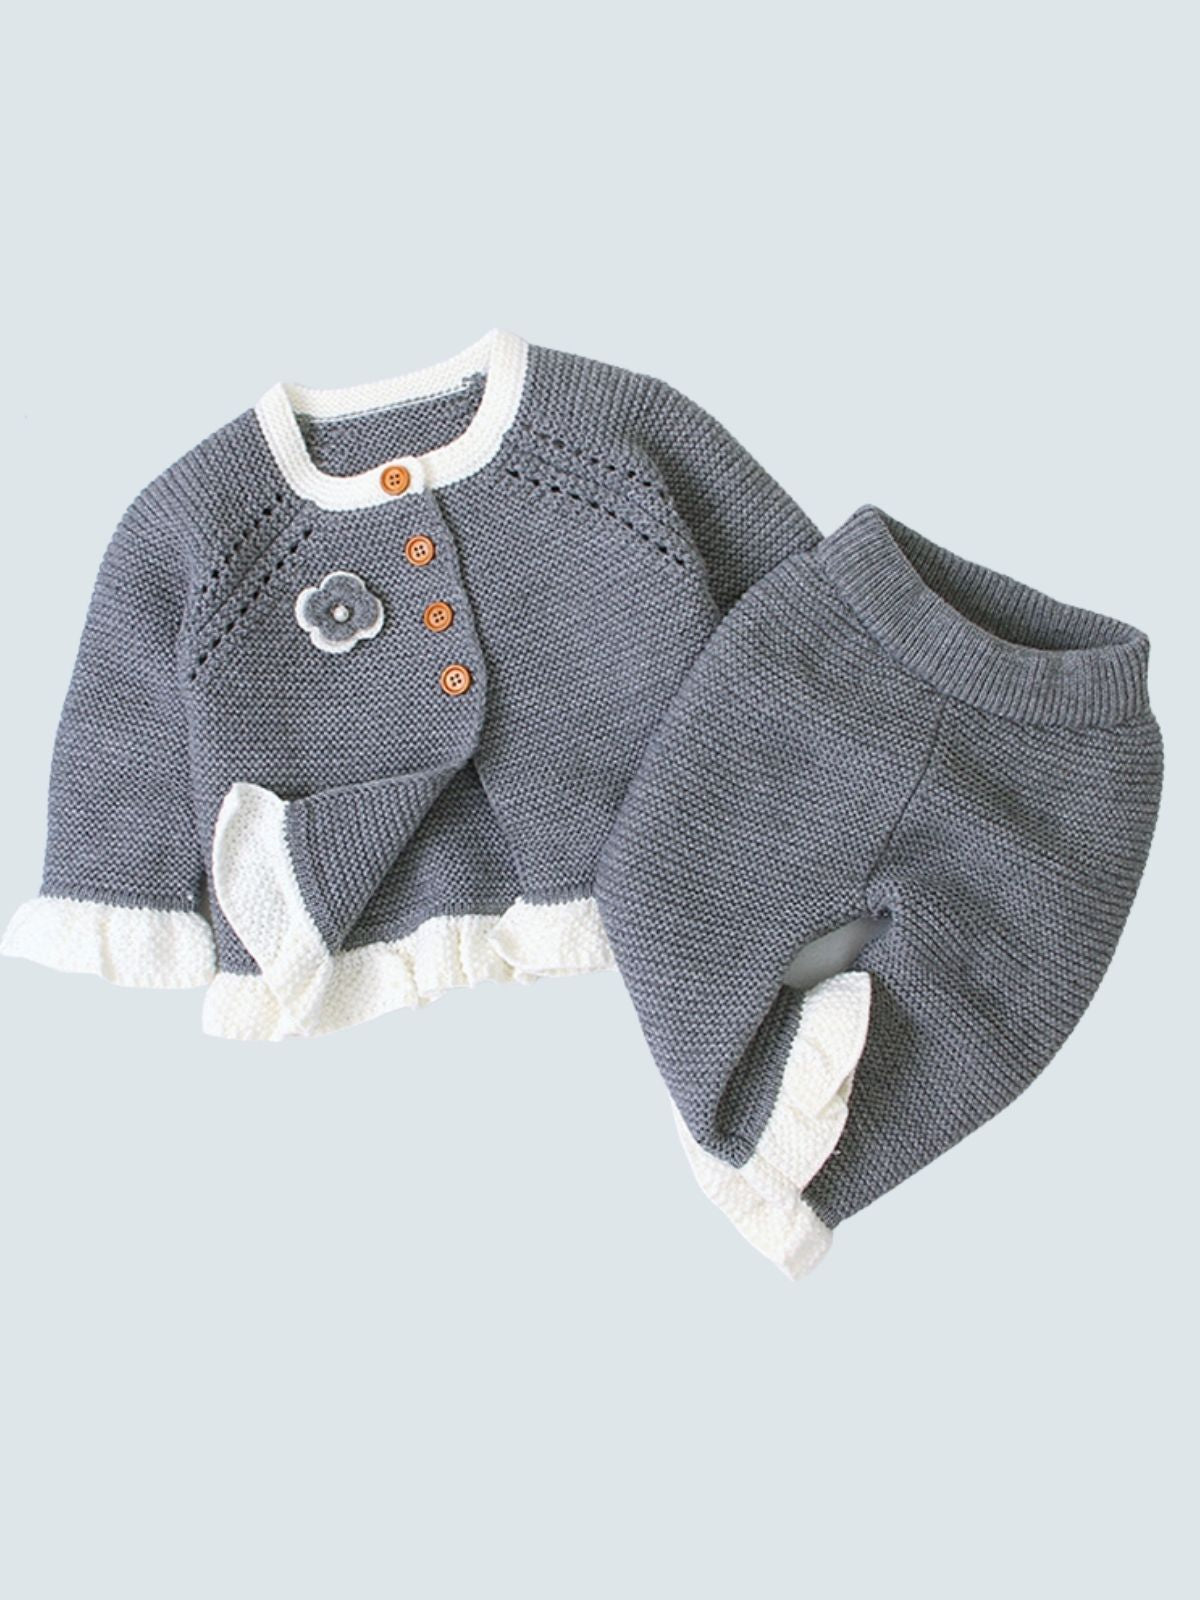 Baby "You're the Knit Girl" Ruffle Long Sleeve Sweater and Pants Set Grey